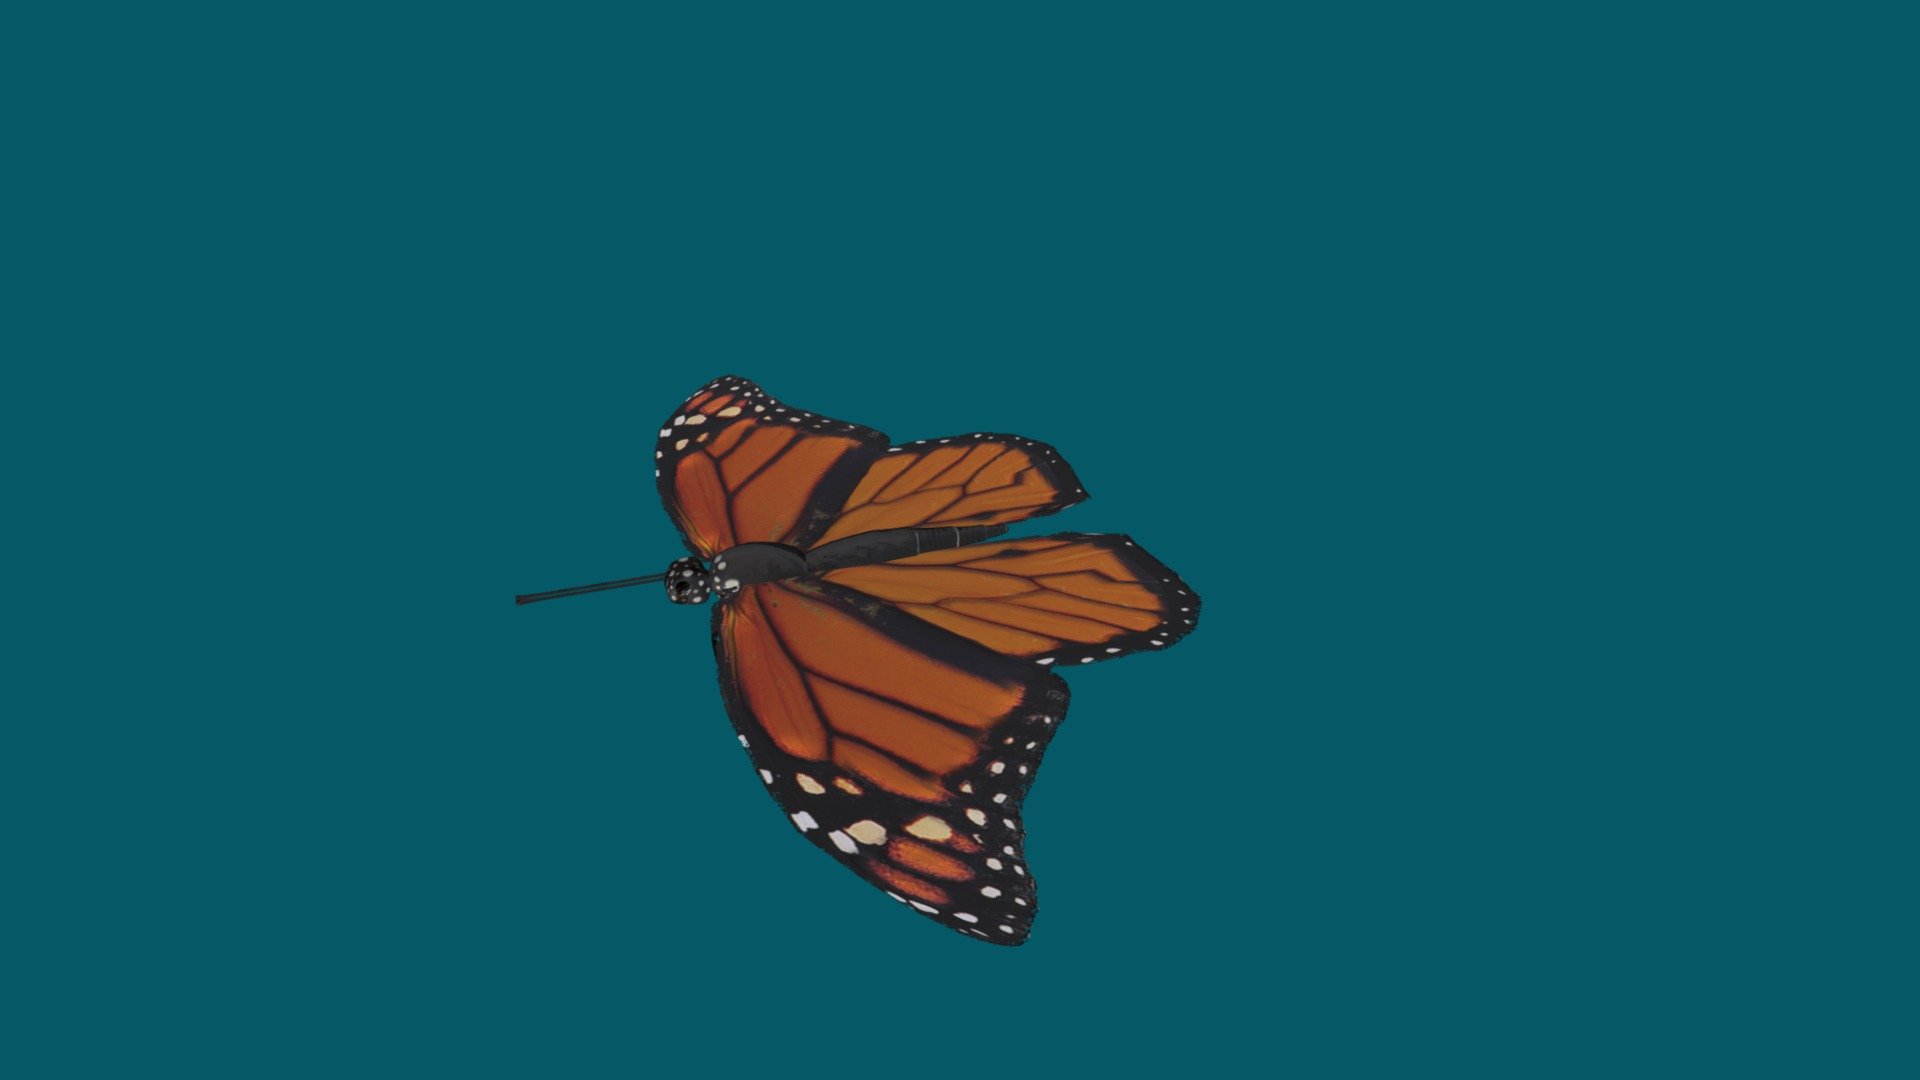 The monarch butterfly is one of the most recognizable and 
well studied butterflies on the planet. Its orange wings are 
laced with black lines and bordered with white dots. 
Famous for their seasonal migration, millions of monarchs migrate from 
the United States and Canada south to California and Mexico for the winter 3d model